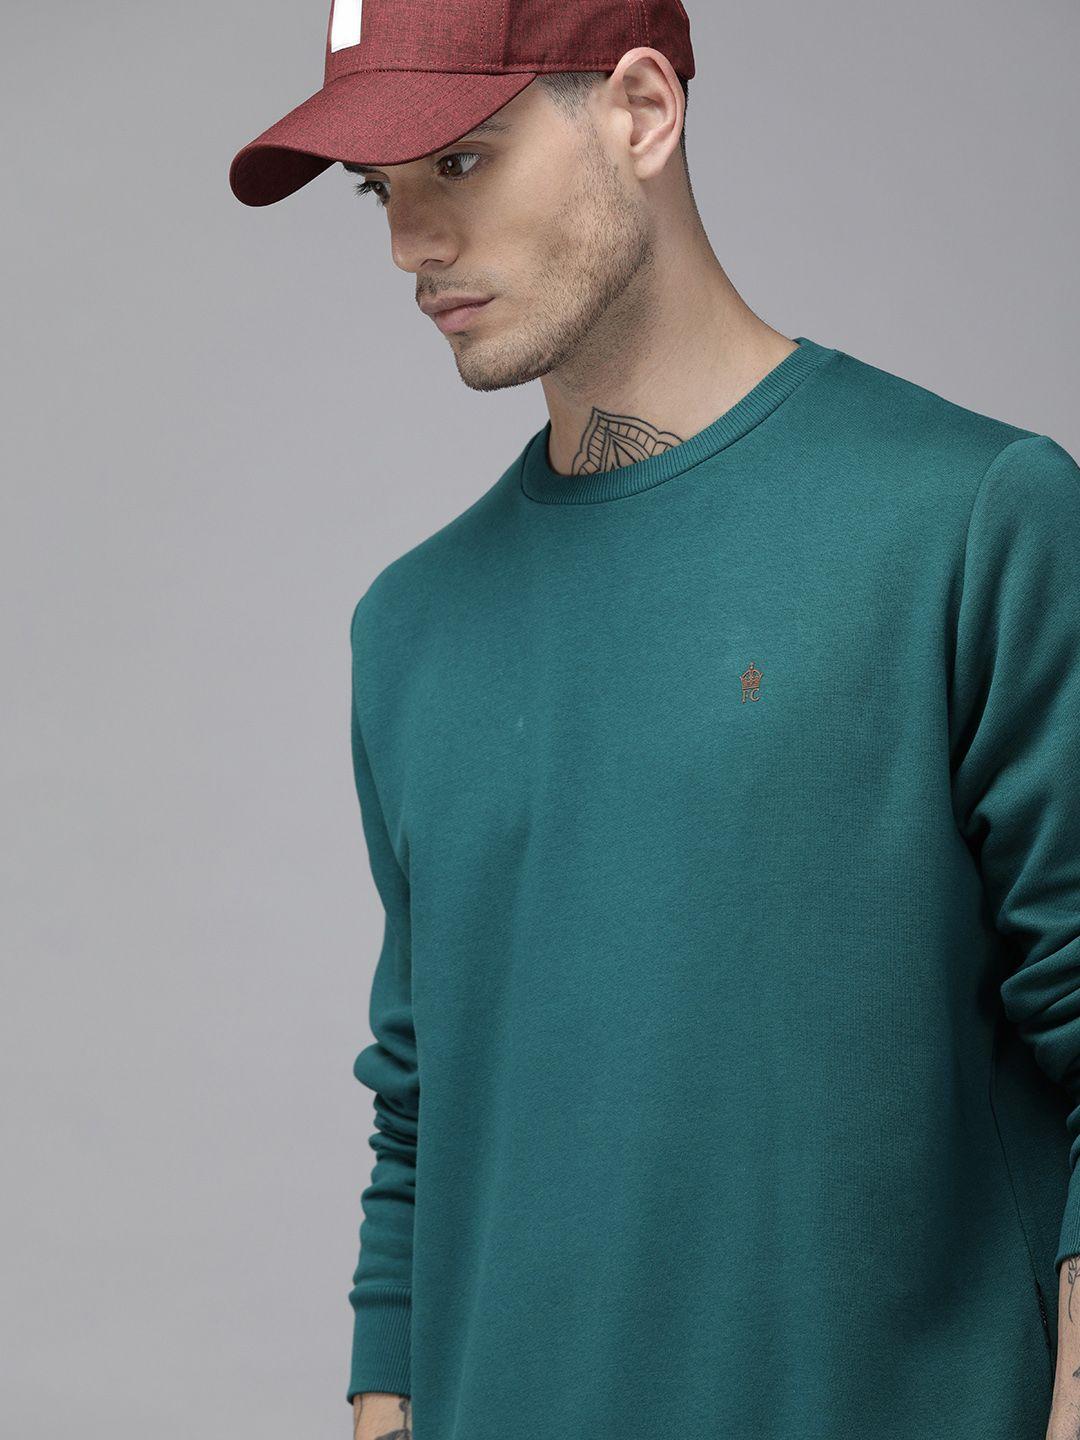 french connection men teal blue solid sweatshirt